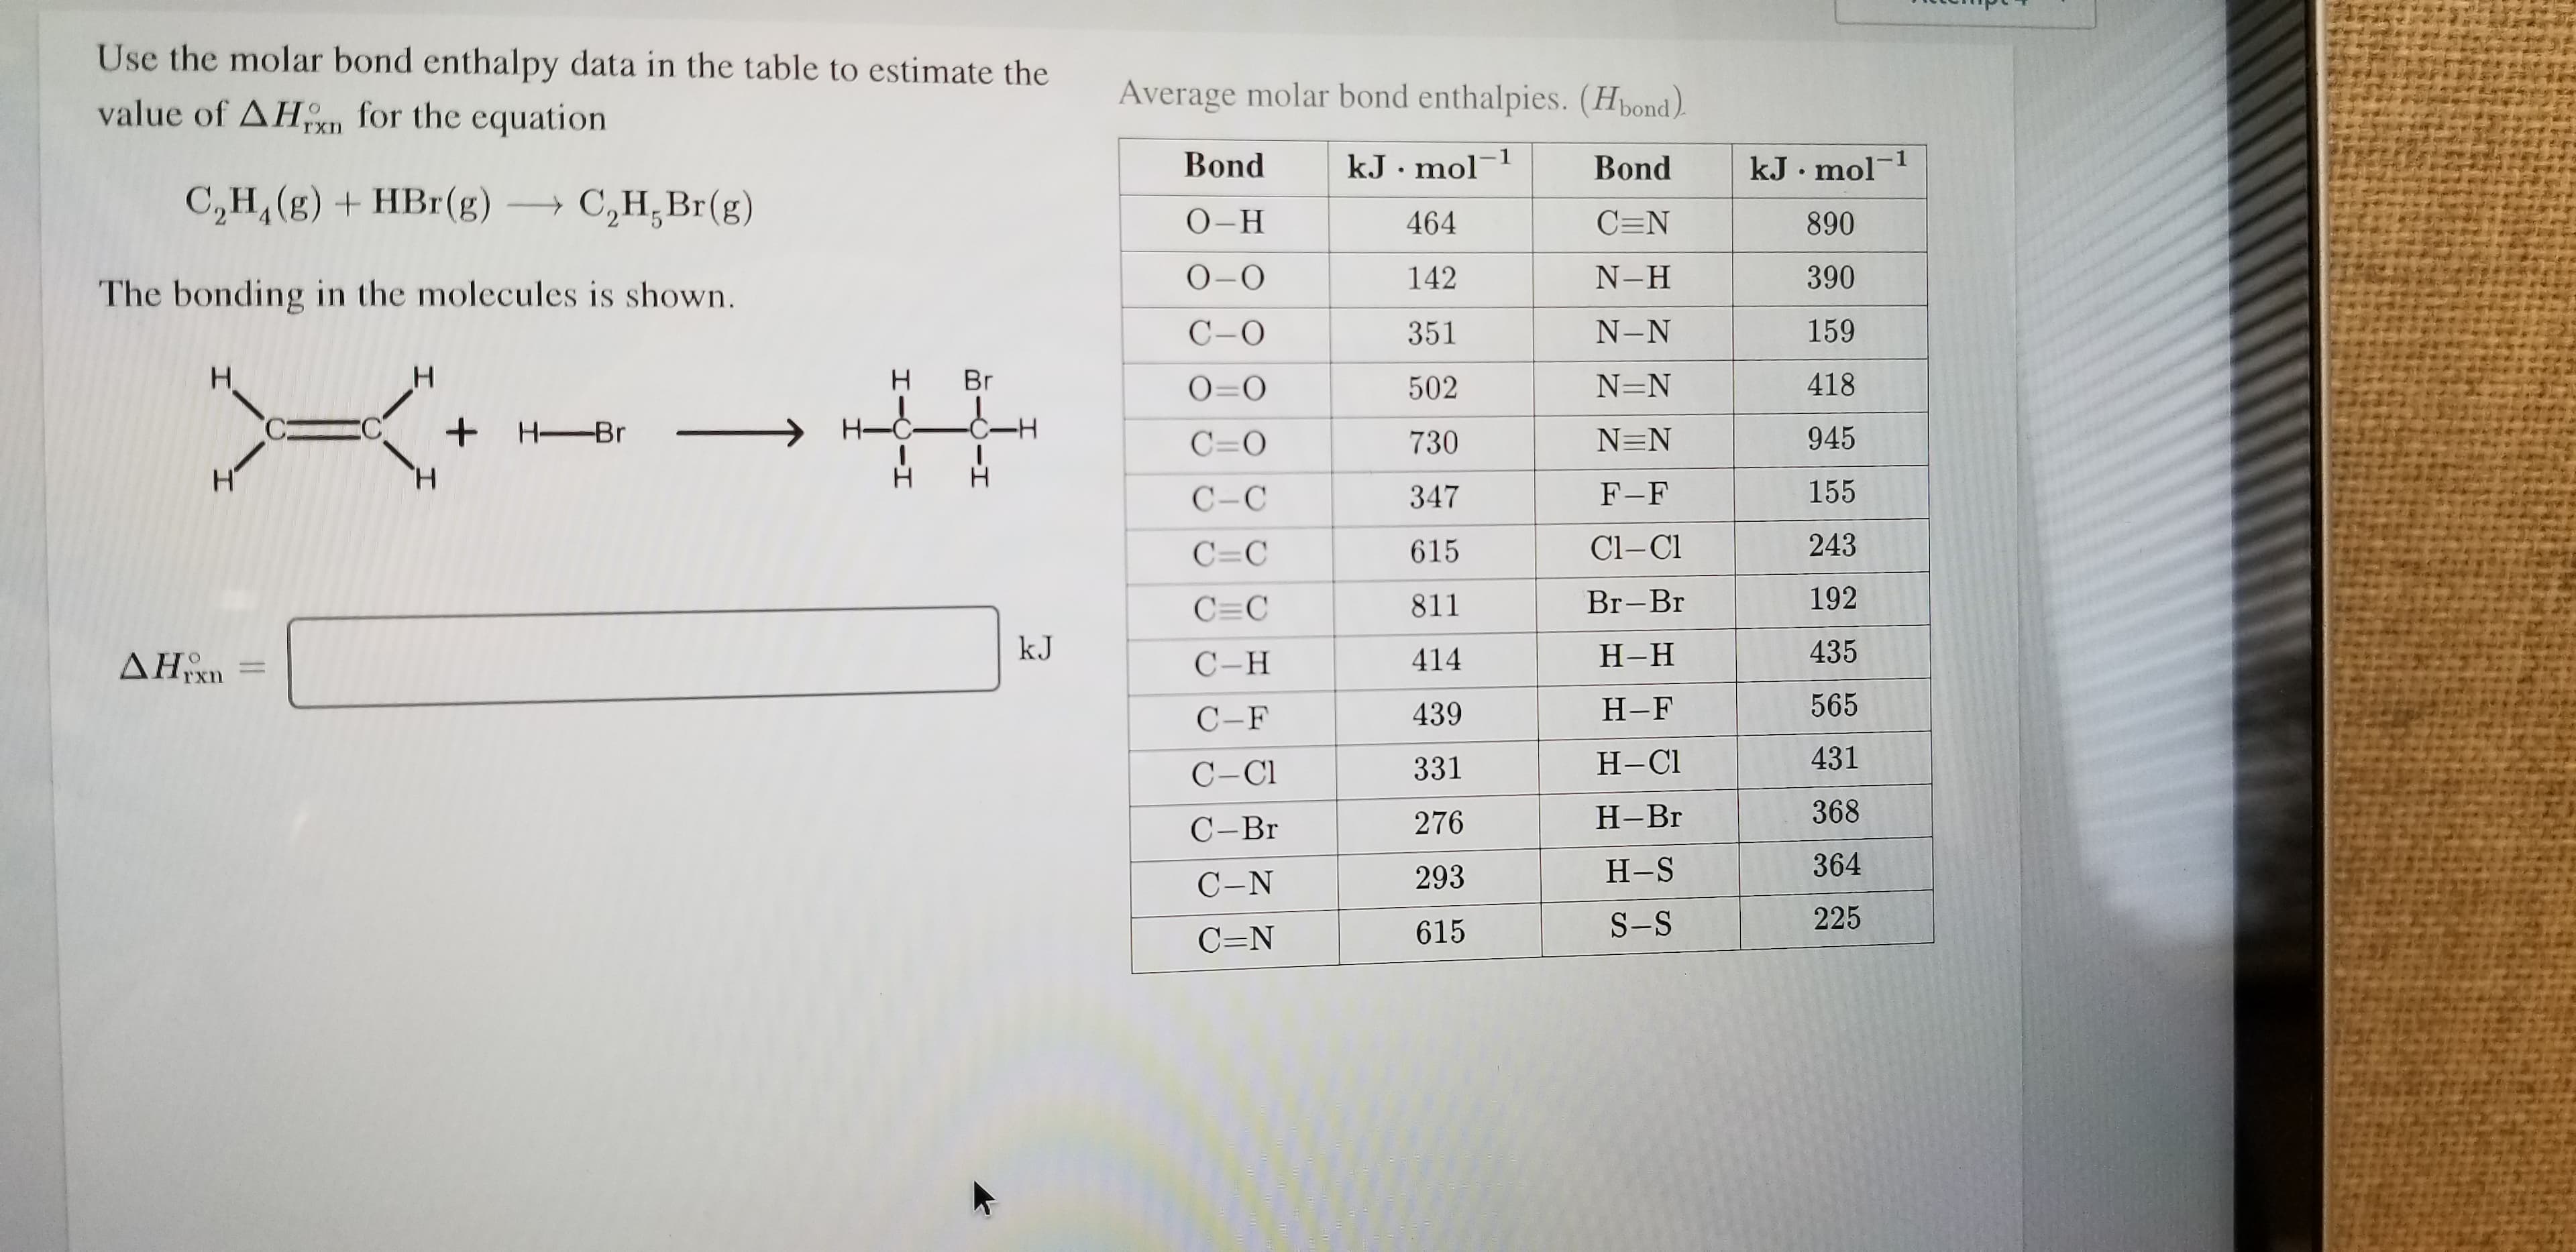 Use the molar bond enthalpy data in the table to estimate the
Average molar bond enthalpies. (Hbond)
value of AHon for the equation
1
kJ mol
Bond
kJ mol-1
Bond
C2H, (g)+HBr(g)
С,Н, Вr(g)
О-Н
464
C=N
890
О-О
N-H
390
142
The bonding in the molecules is shown.
159
С -О
N-N
351
H.
H
418
N=N
O=O
502
H-C
C C
H-Br
945
N=N
730
C=O
H
H
155
F-F
С -С
347
243
Cl-CI
615
C=C
192
Br-Br
811
C C
kJ
435
Н-Н
ΔΗΑ
414
С-Н
565
Н-F
439
С -F
431
Н-СІ
331
C-Cl
368
Н-Вг
276
С -Br
364
Н-S
293
C-N
225
S-S
615
C=N
BIIH
I-CII
I
